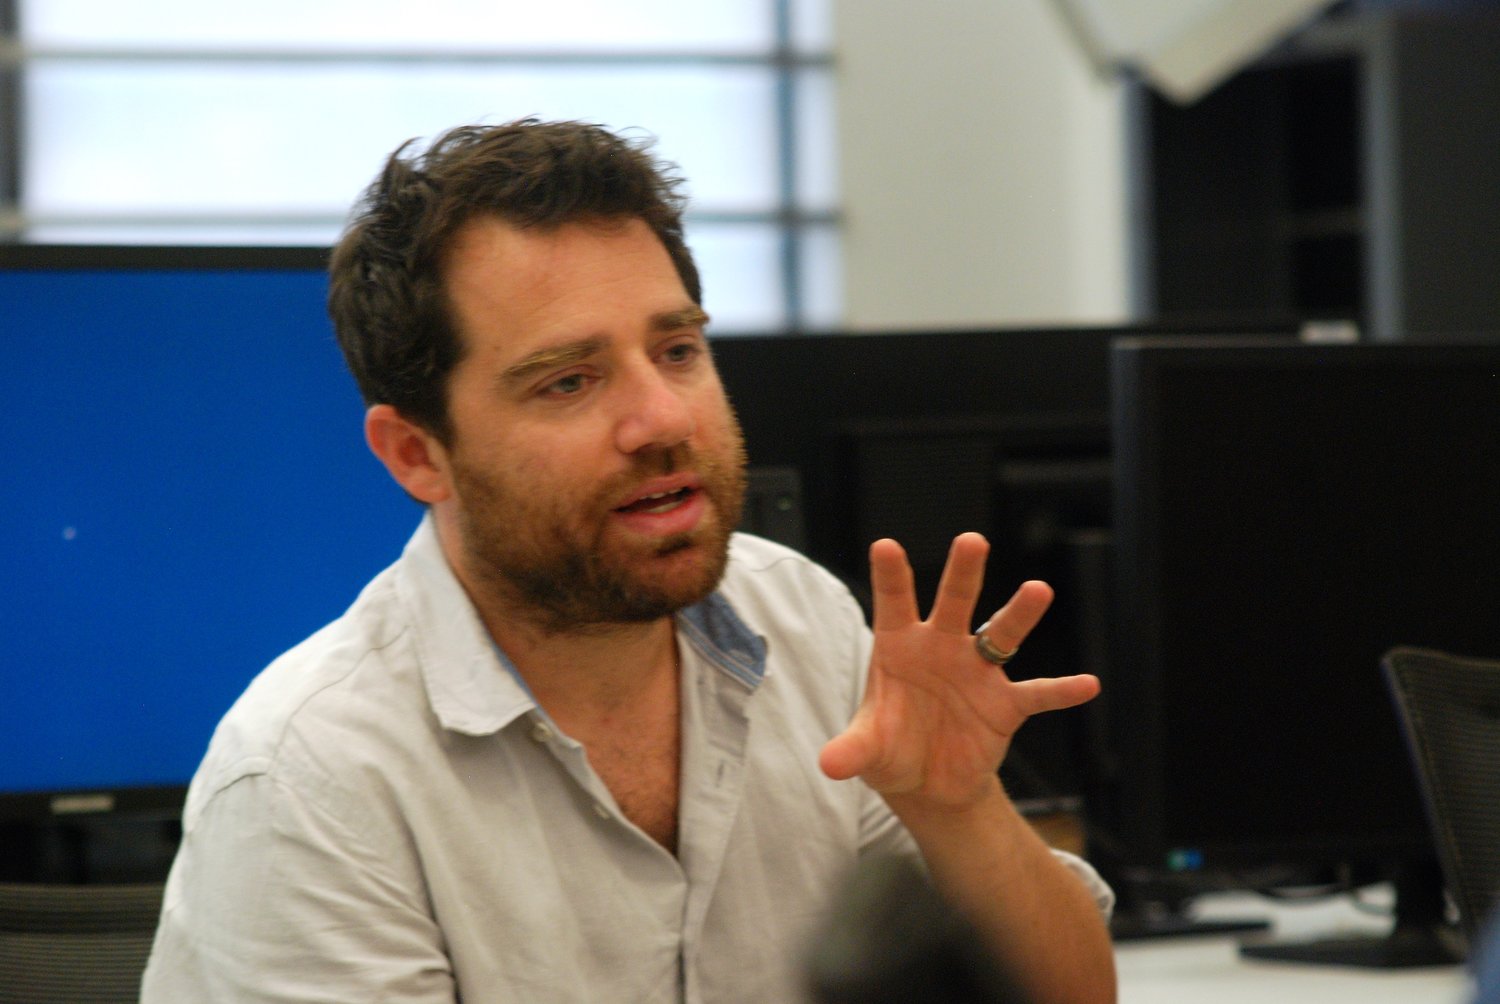 Author Michael Otterman, formerly of Merrick and Old Westbury, stopped by the Hofstra University Summer High School Journalism Institute on July 29 to discuss journalism with participants.